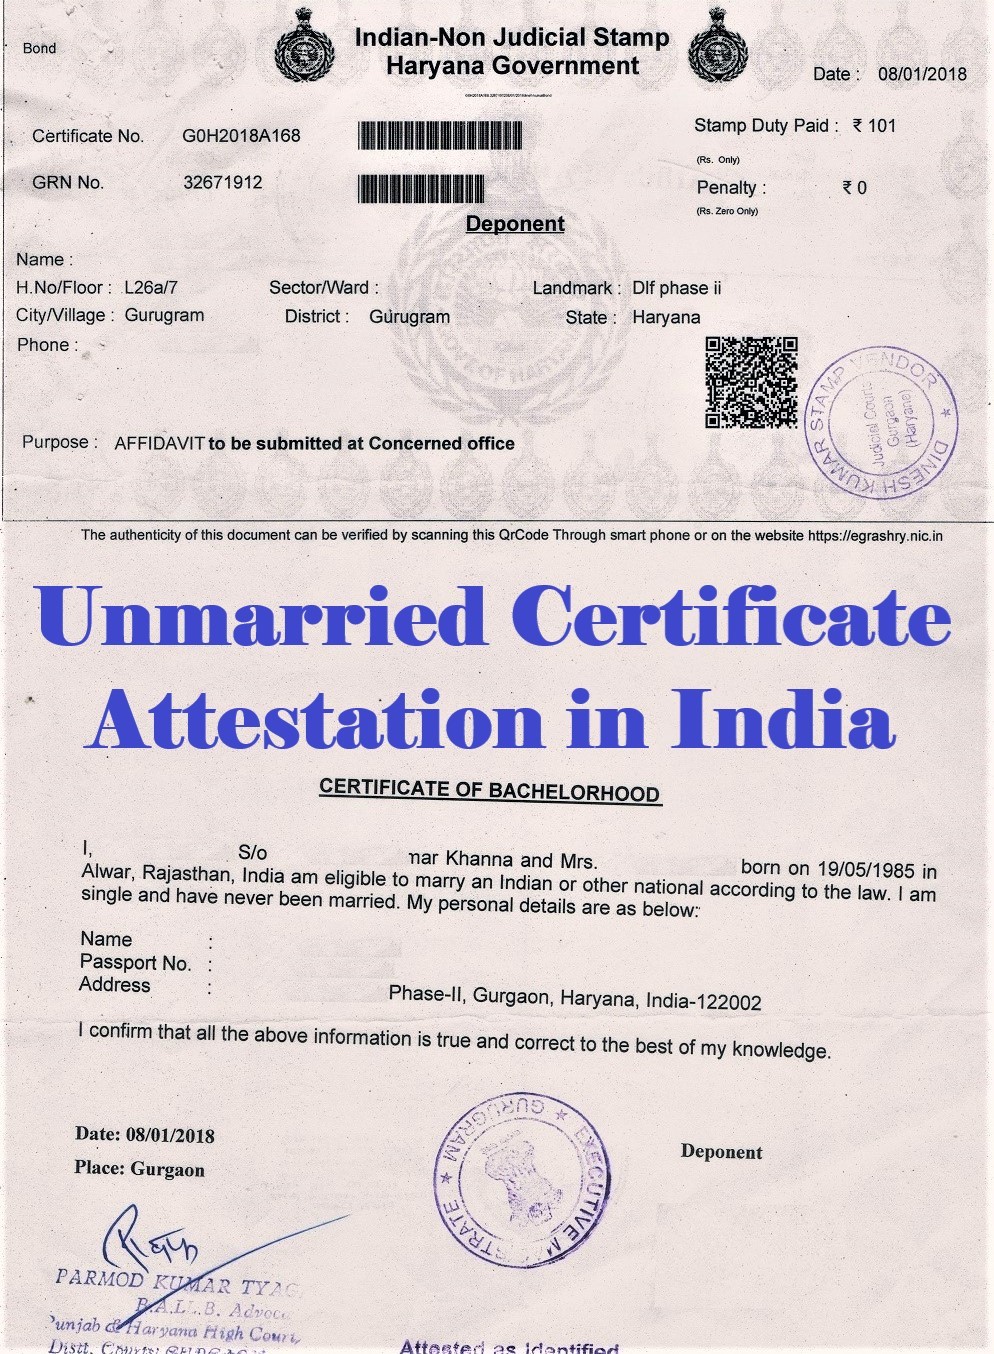 Unmarried Certificate Attestation from Eswatini Embassy